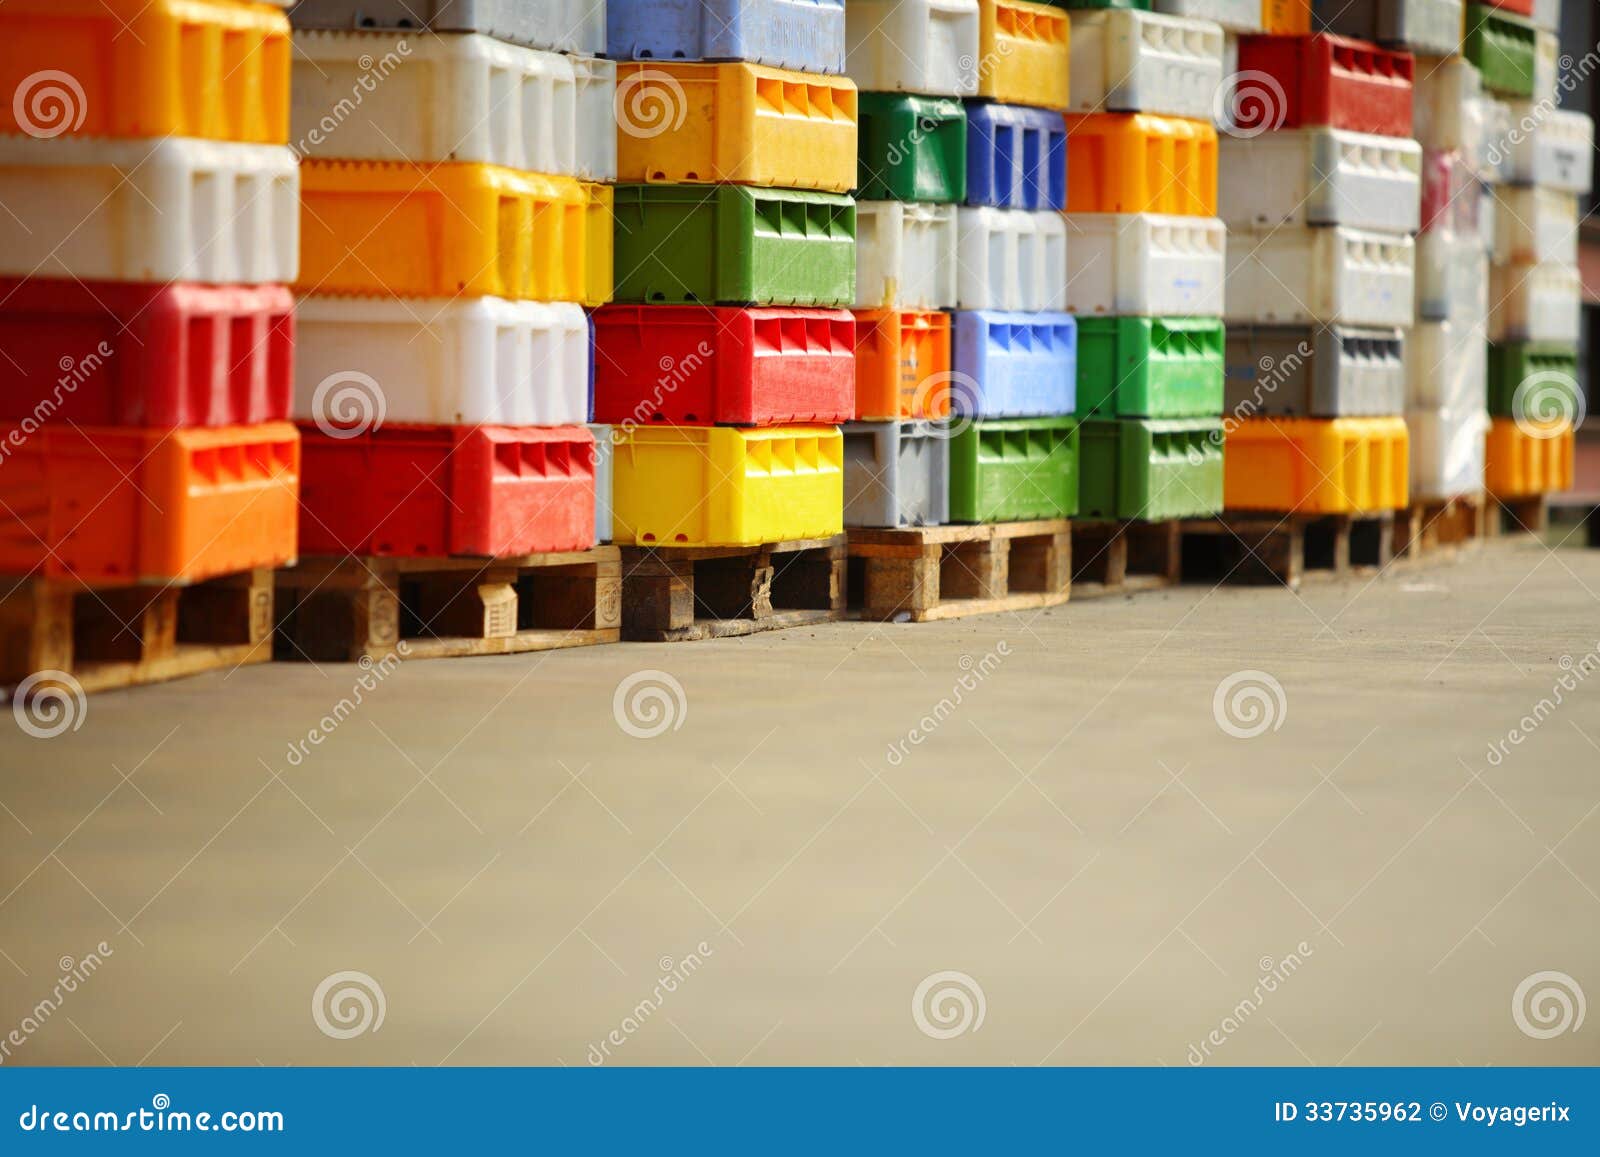 Colorful Boxes Plastic Crates Containers for Fish Stock Photo